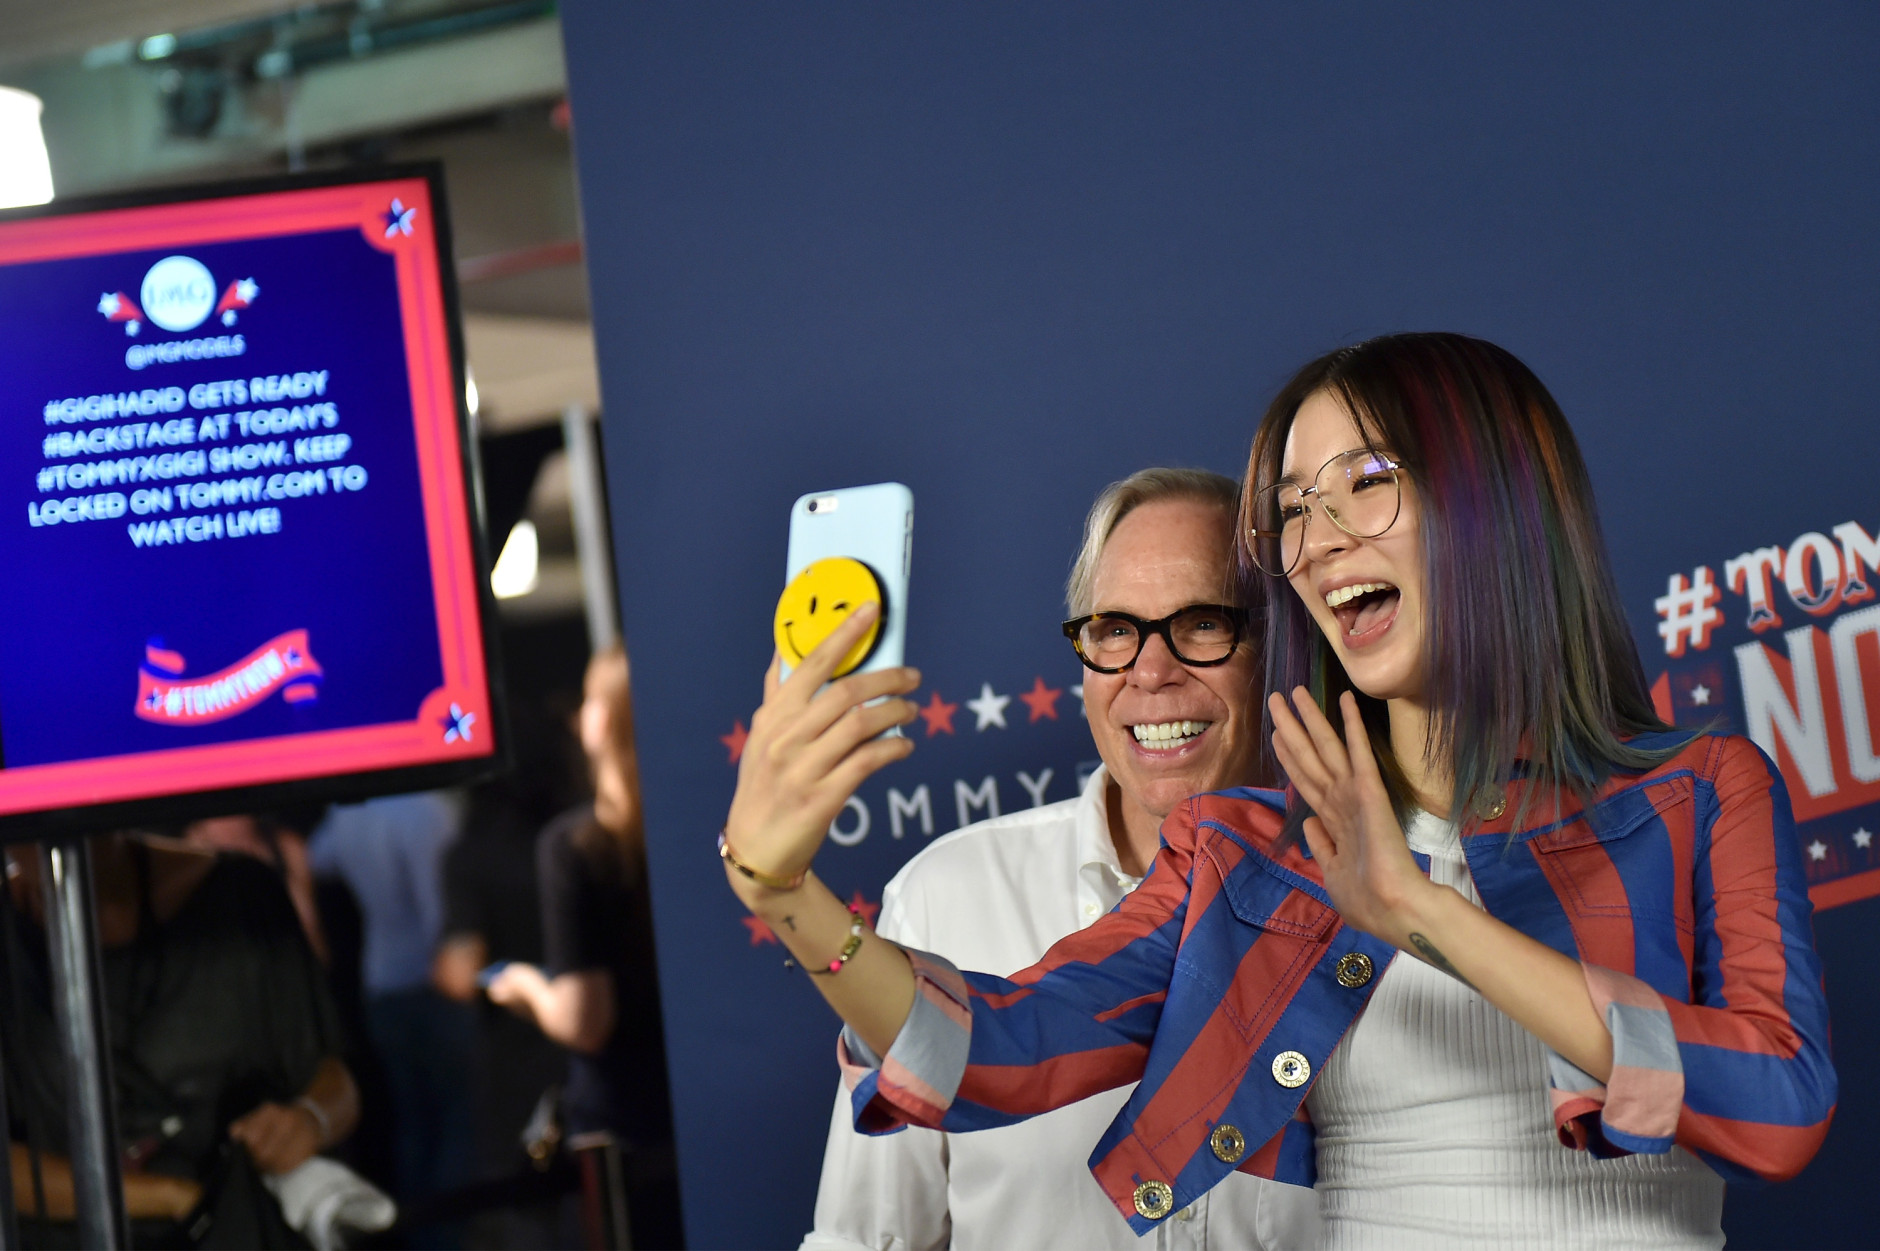 NEW YORK, NY - SEPTEMBER 09:  Designer Tommy Hilfiger and Irene Kim pose backstage at the #TOMMYNOW Women's Fashion Show during New York Fashion Week at Pier 16 on September 9, 2016 in New York City.  (Photo by Mike Coppola/Getty Images for Tommy Hilfiger)